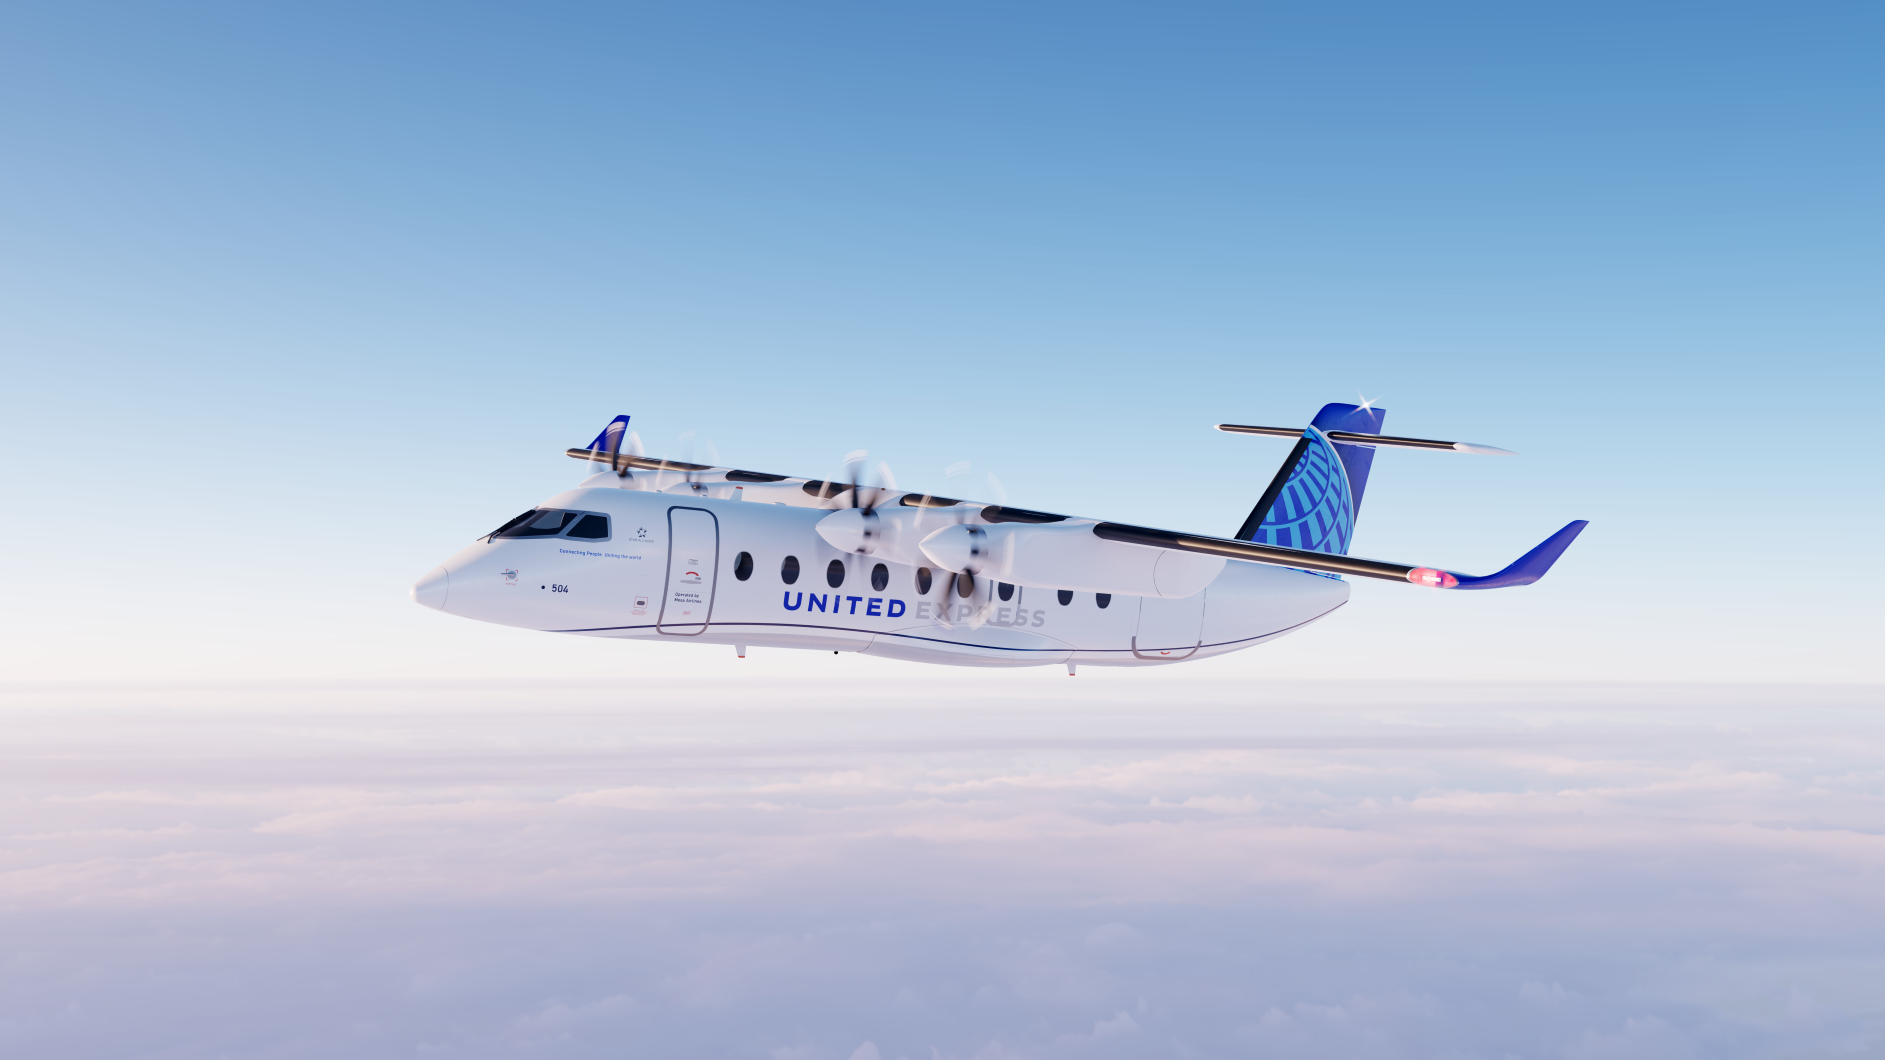 Electric aeroplane startup Heart Aerospace raises $35 million, as airlines order 200 aircraft